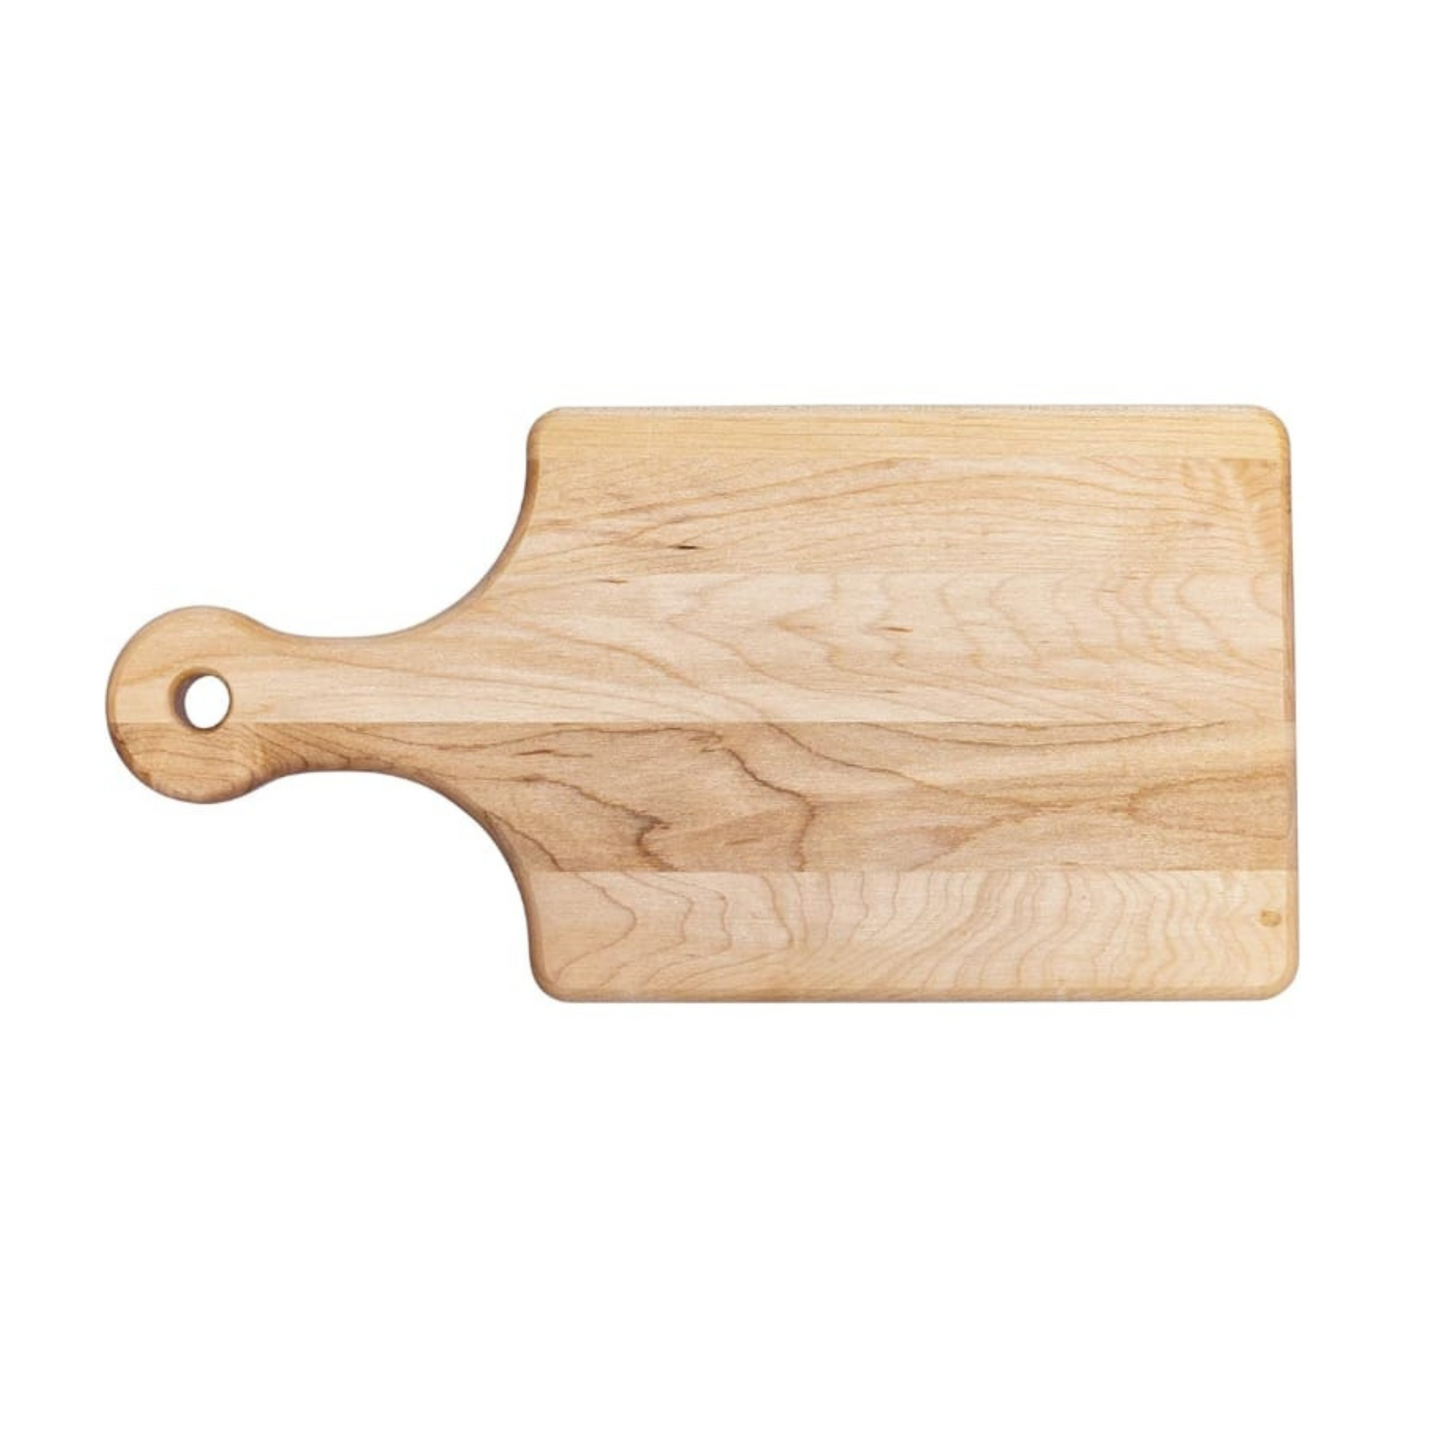 Let's Sip & Succeed Cutting Board - Premium Cutting Boards from Hipster Lasers - Just $40! Shop now at Hipster Lasers